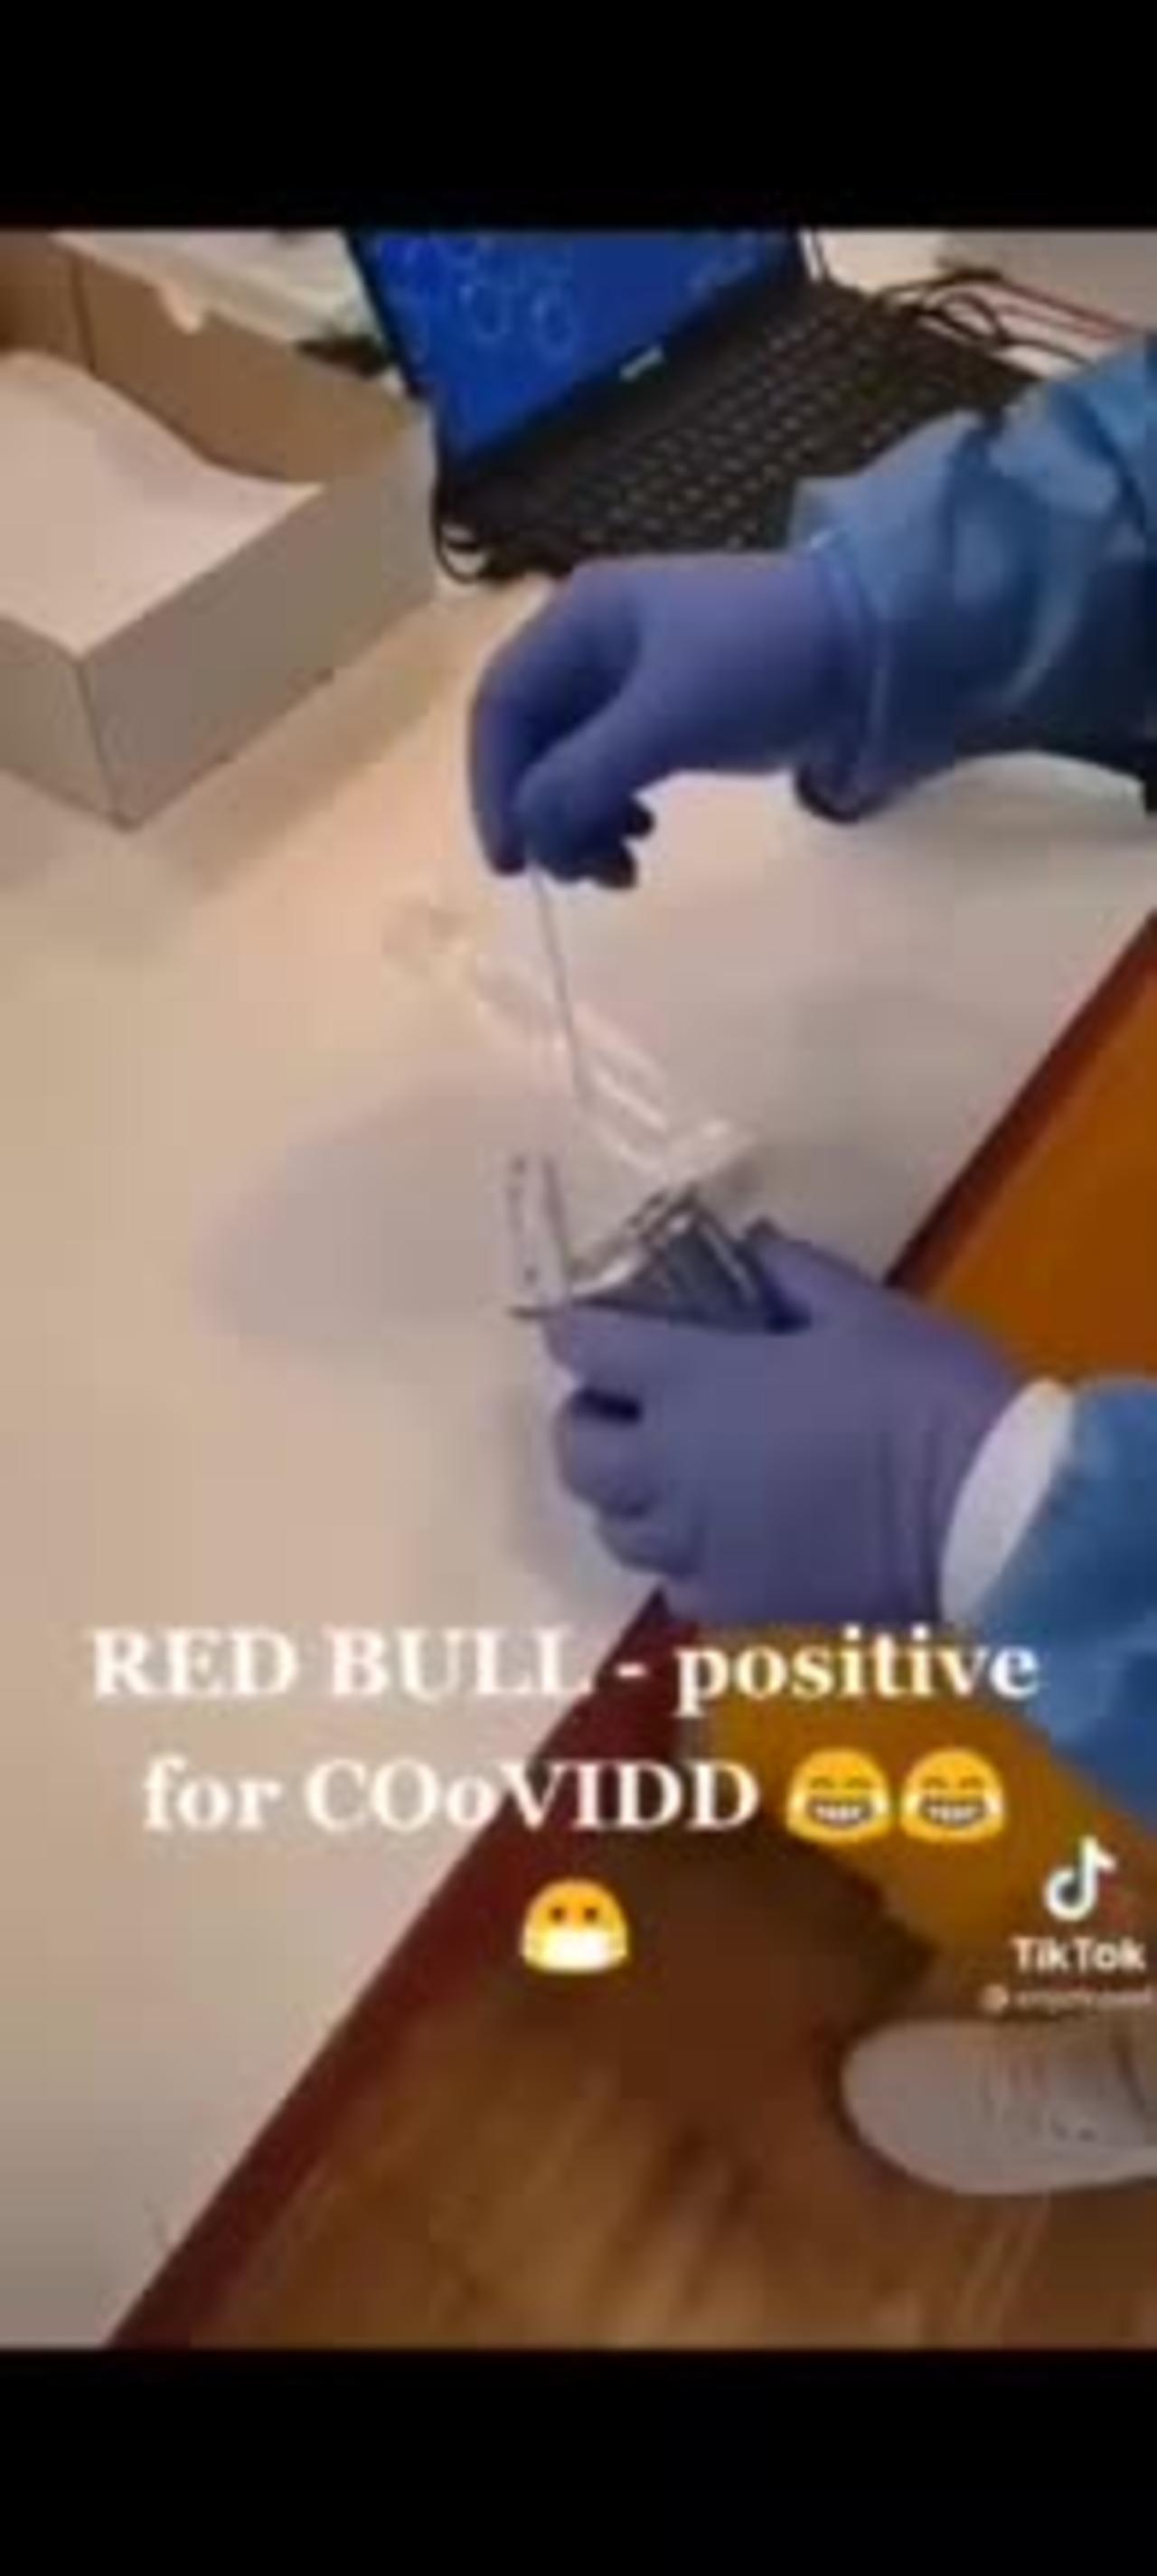 A Can of Red Bull Tests Positive for Covid